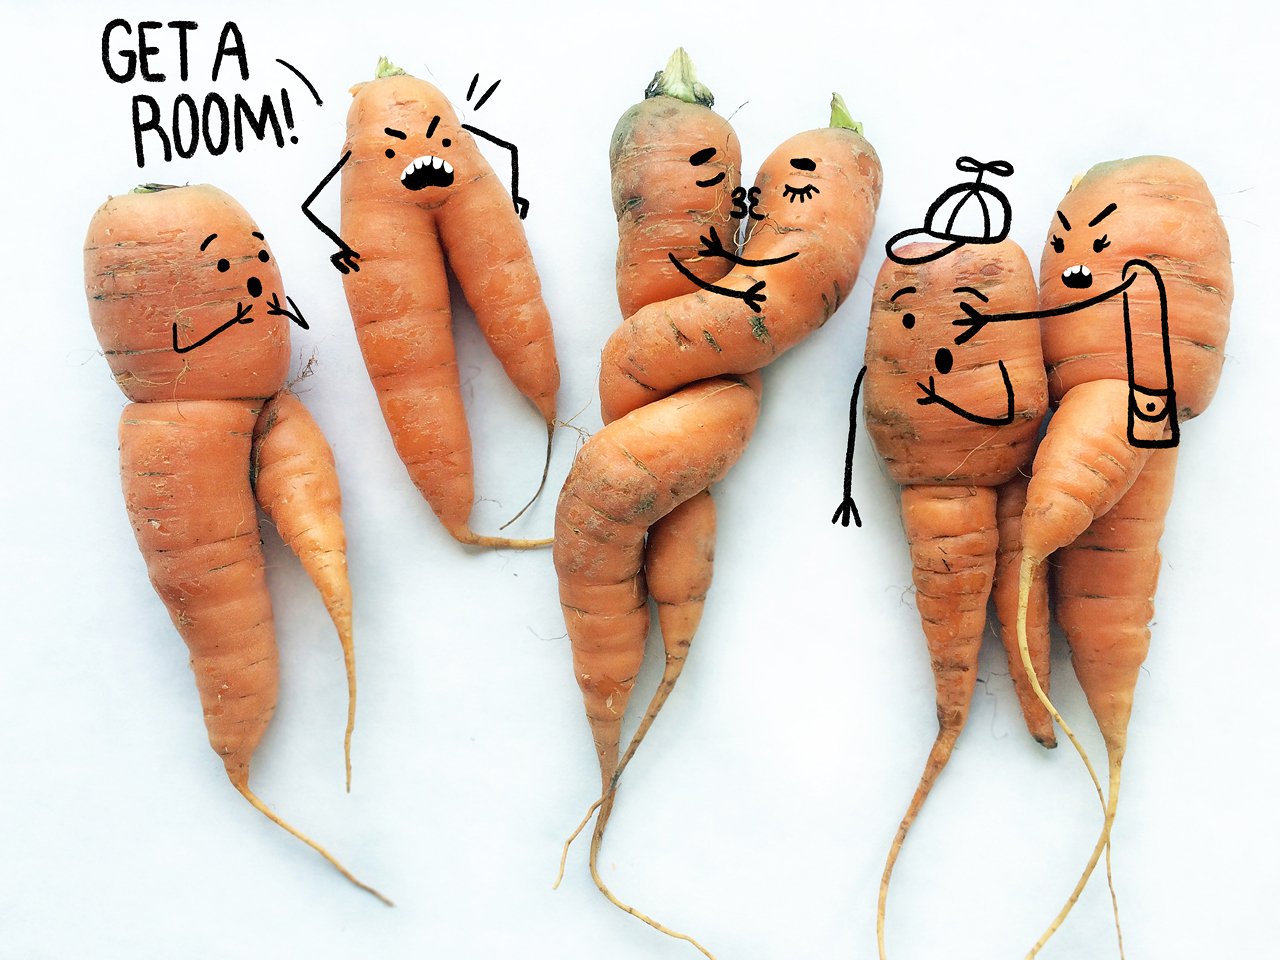 funny looking carrots with faces illustrated on them